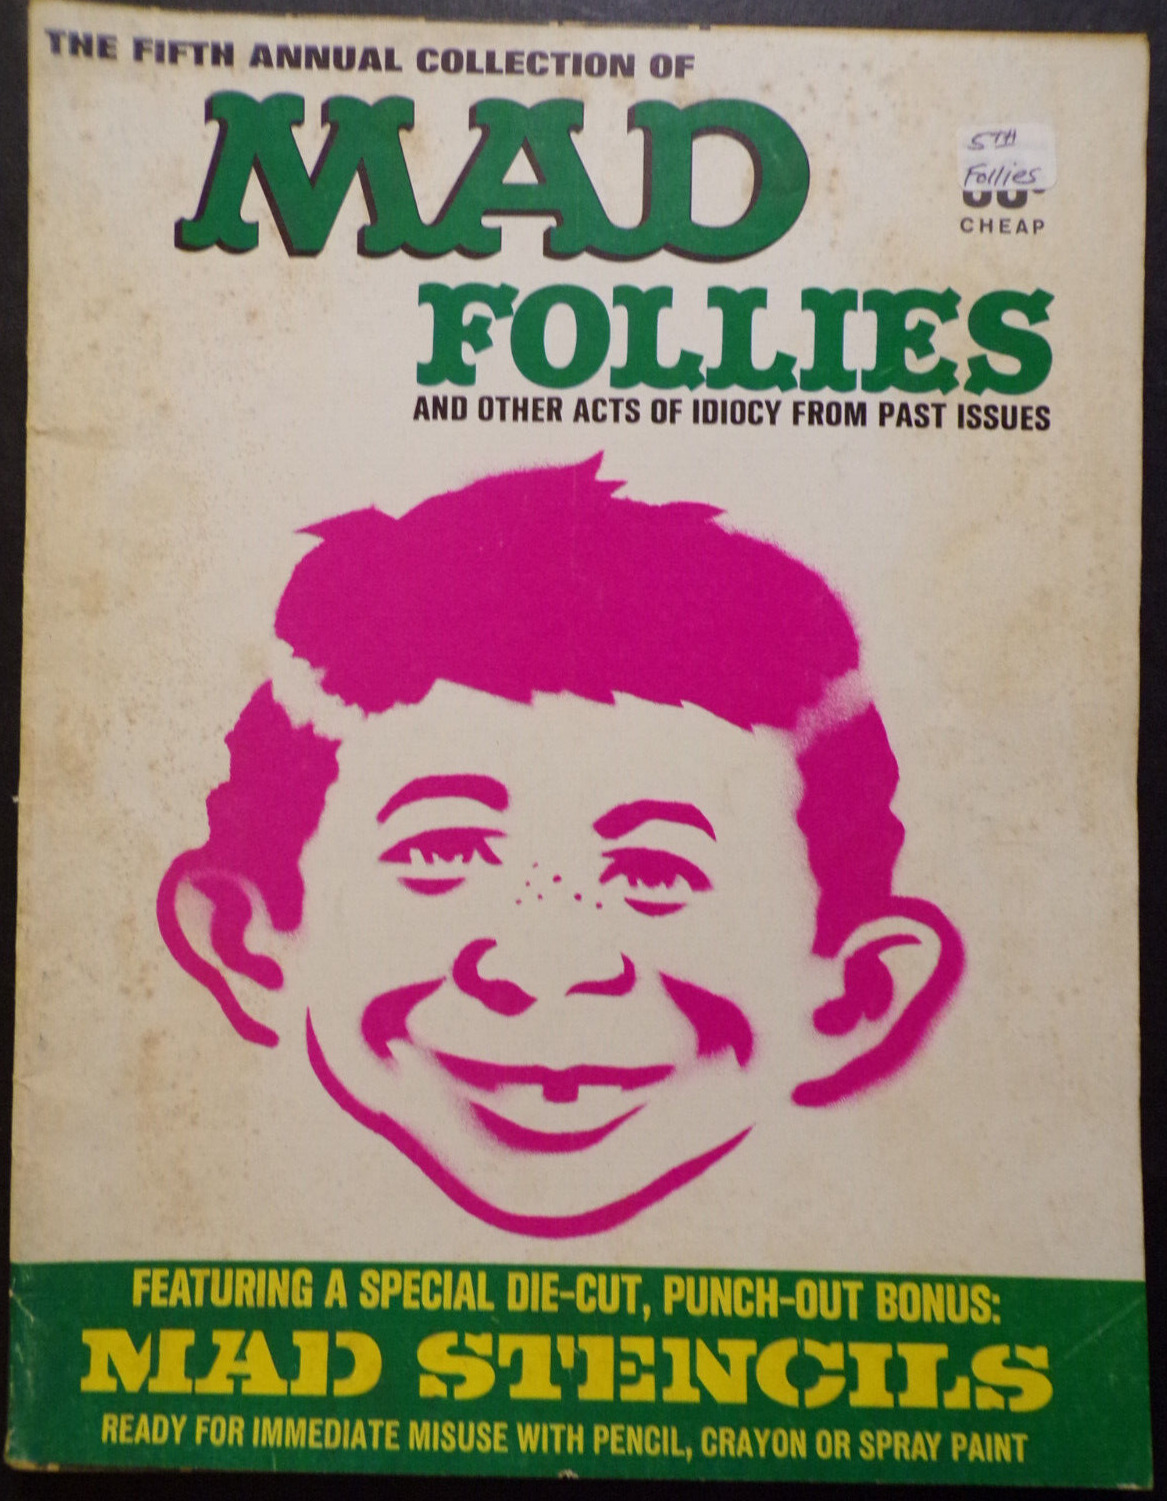 Fifth Collection of Mad Follies (E.C. Publications 1967) no stencils, M5